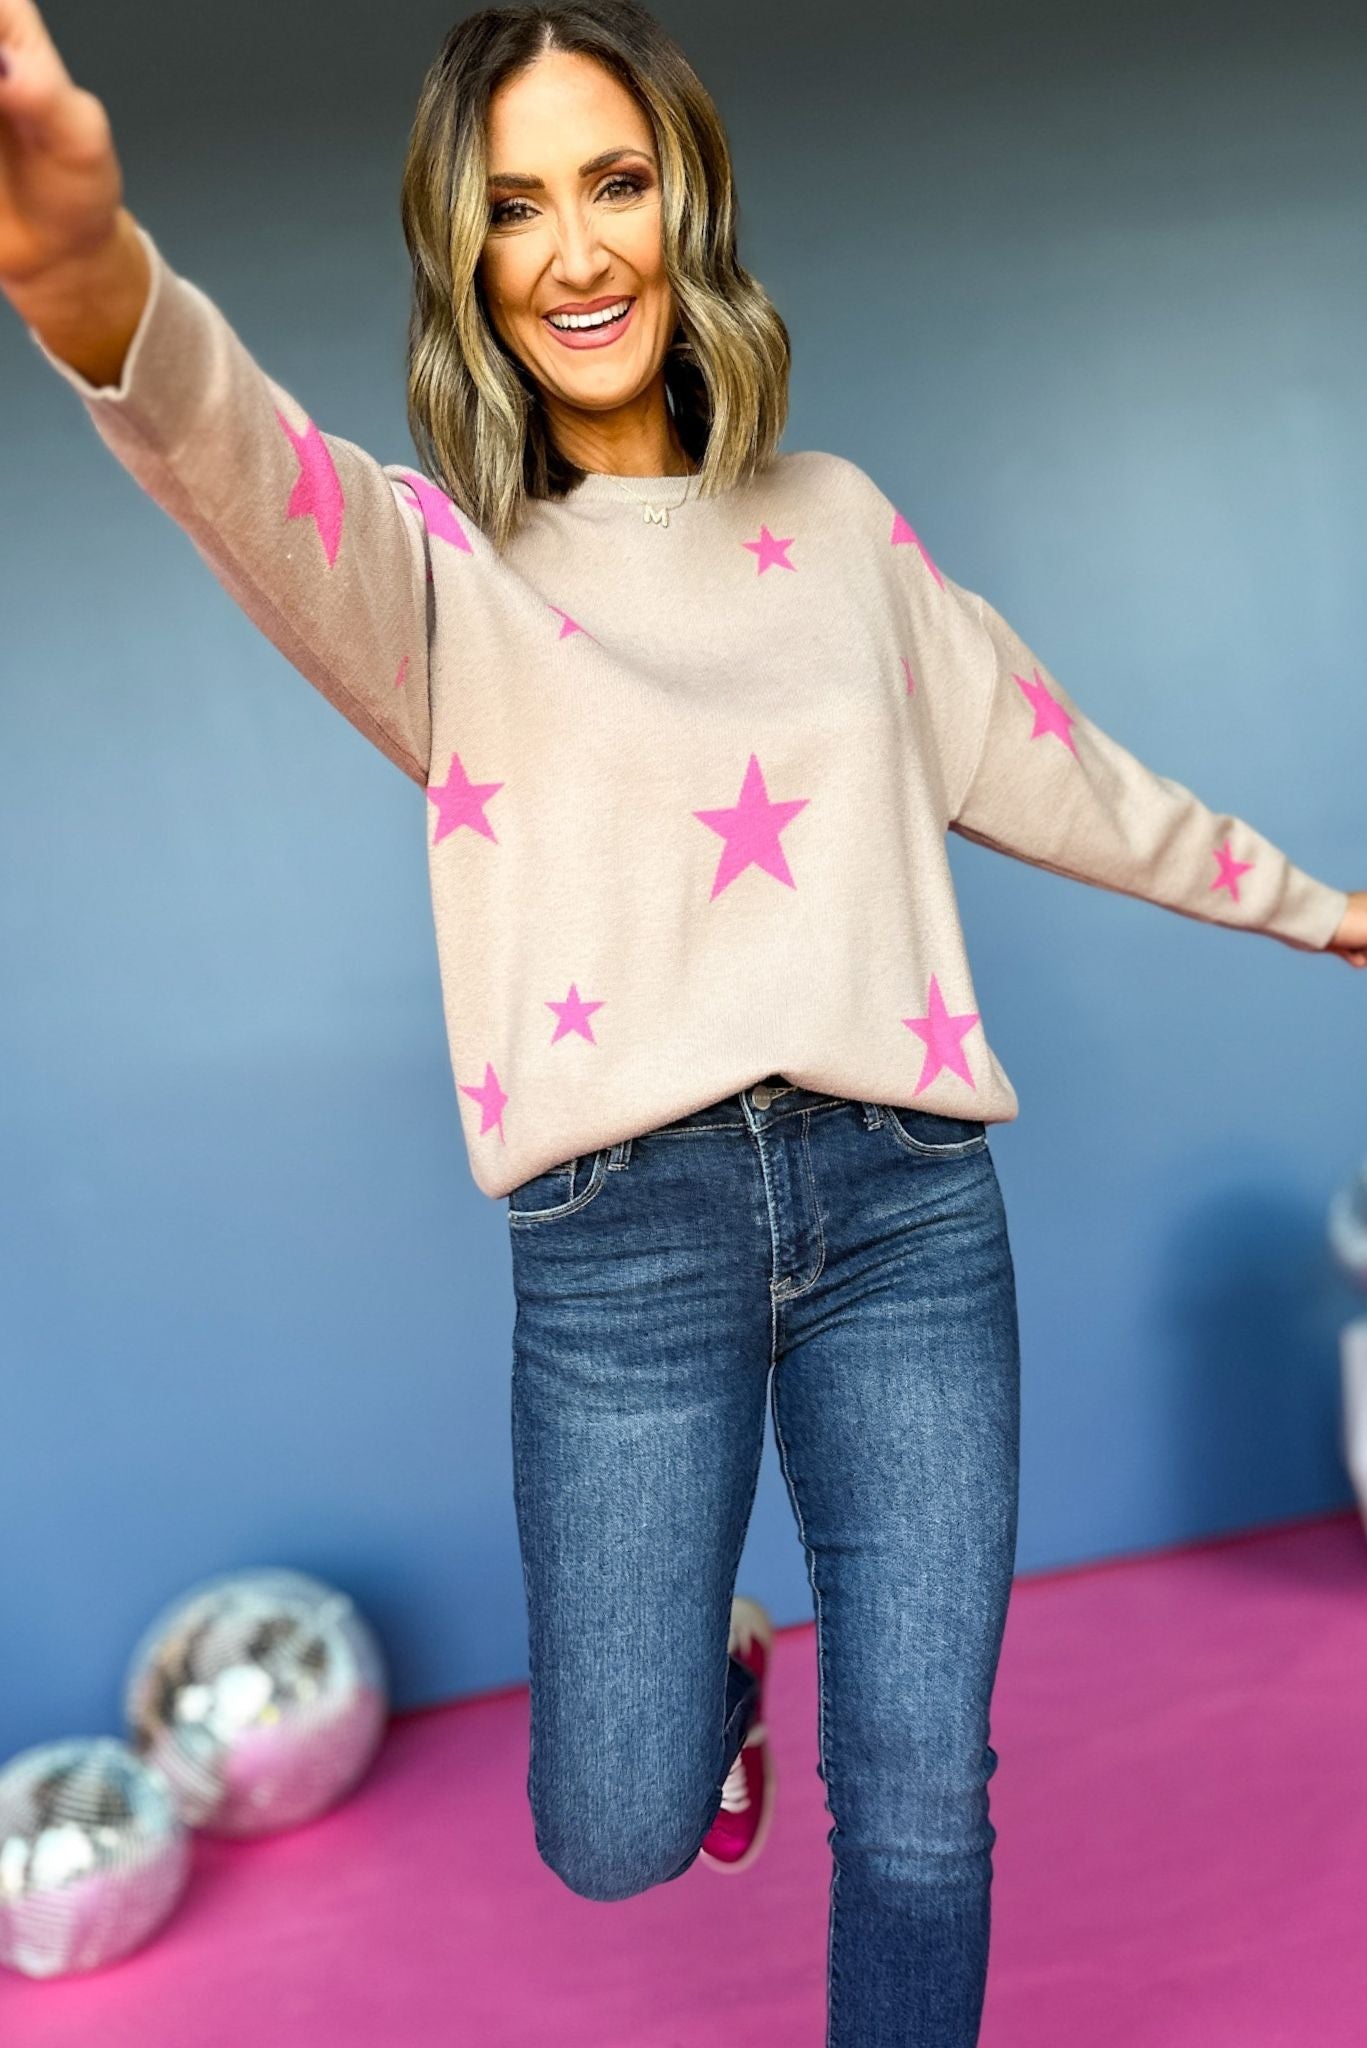 Load image into Gallery viewer, Pink Star Pattern Round Neck Sweater, elevated style, elevated sweater, must have sweater, must ahve print, fun mom style, fun mom sweater, fall style, fall sweater, shop style your senses by mallory fitzsimmons
